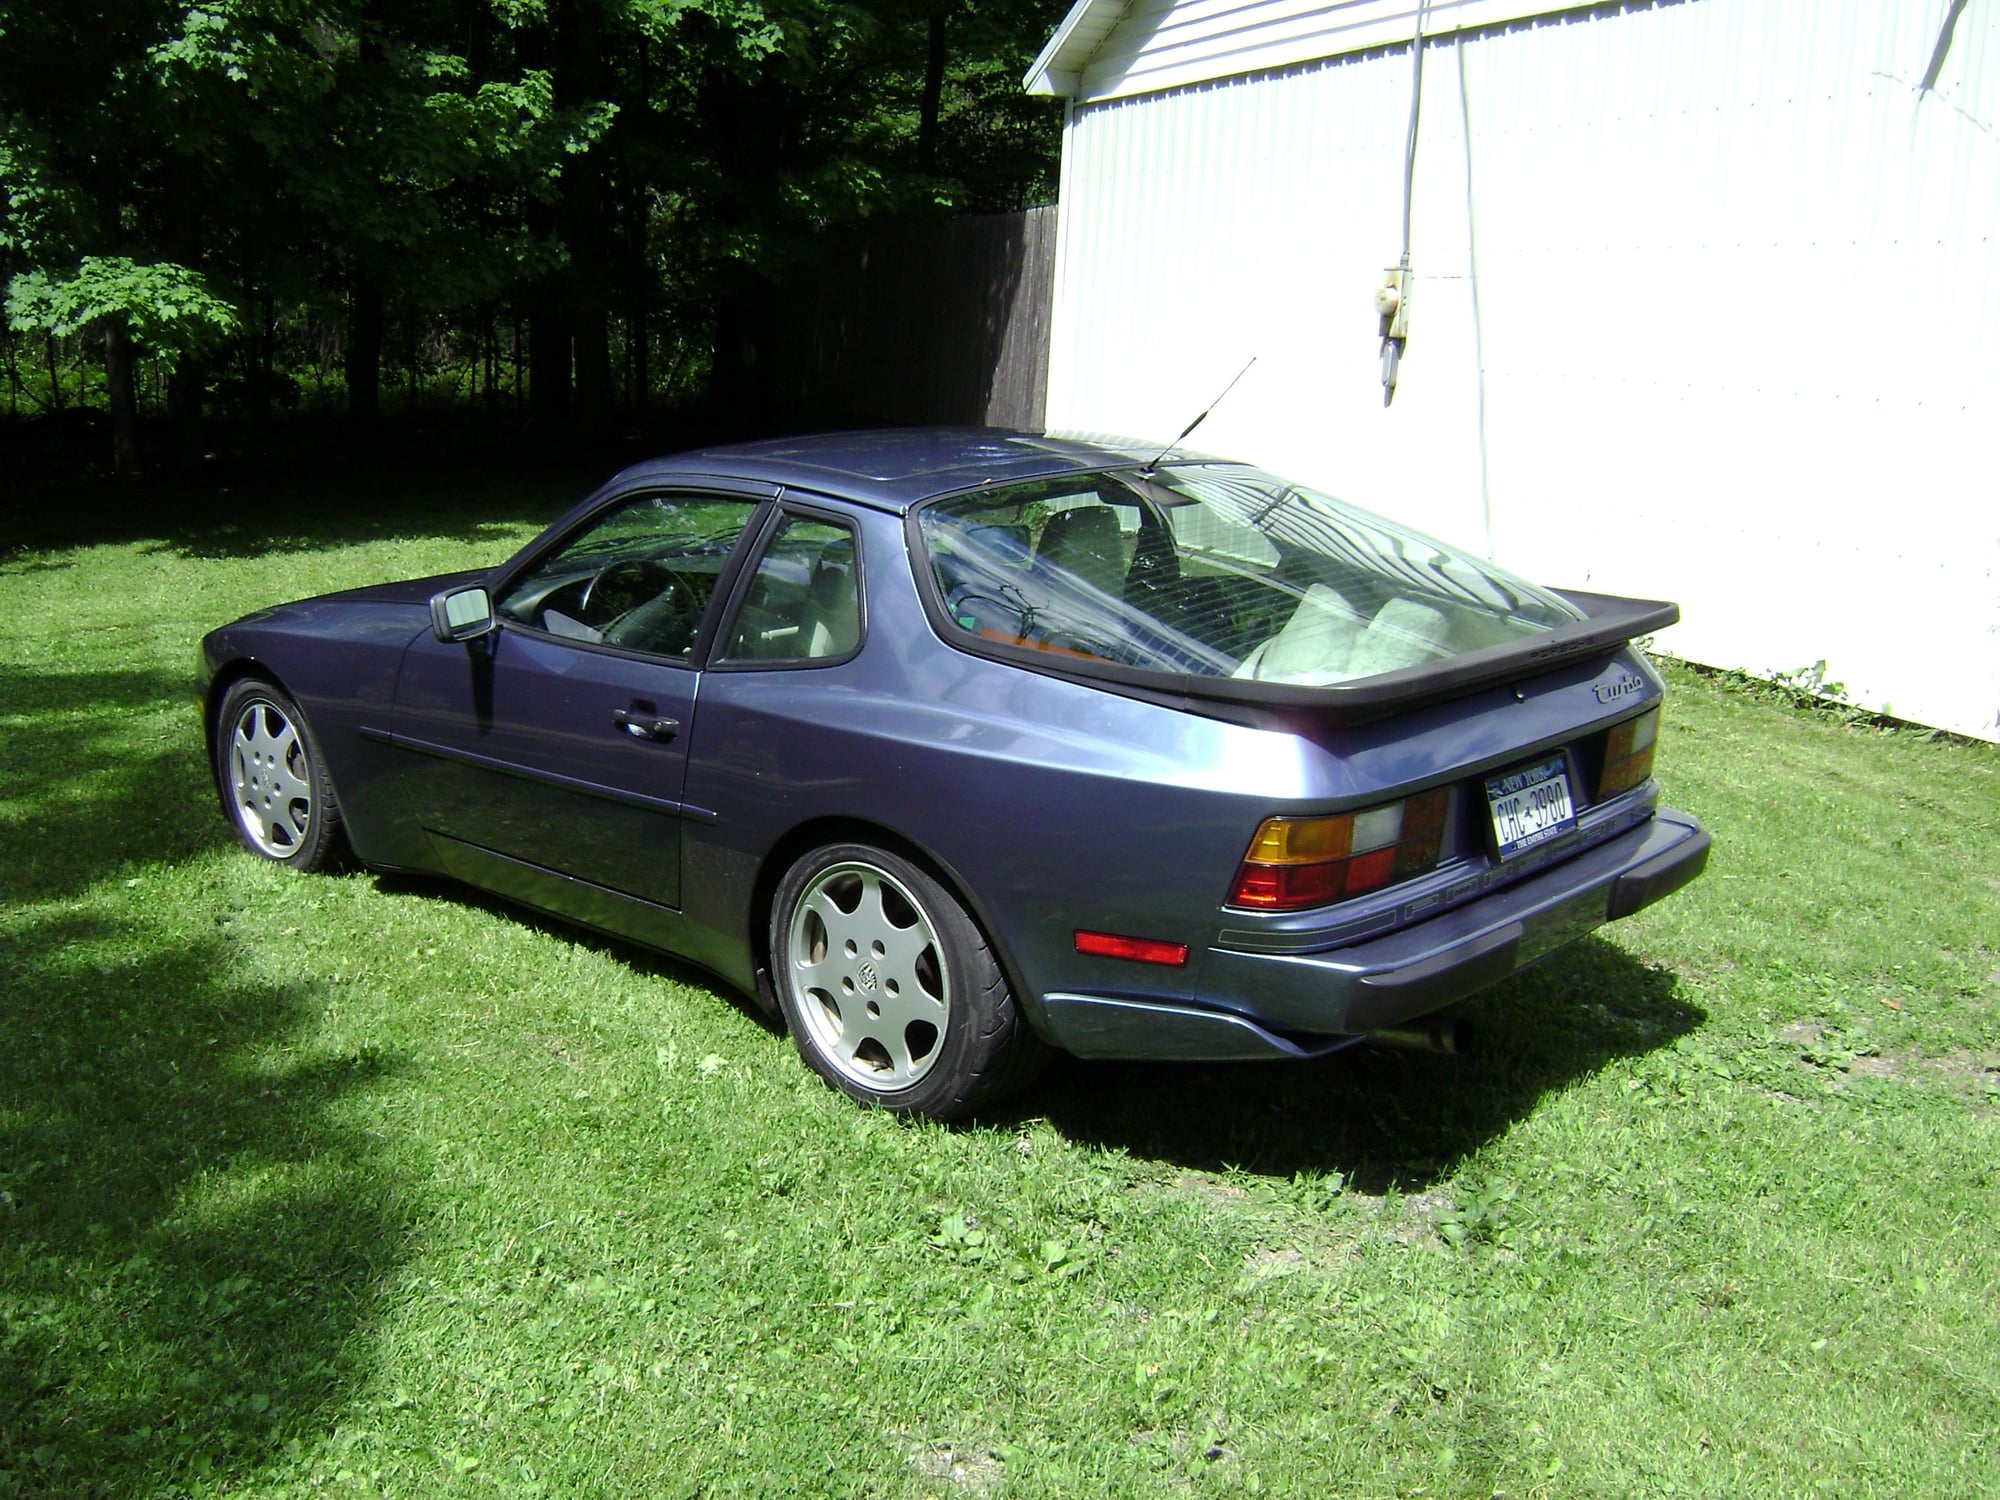 1989 Porsche 944 Turbo. M030 package in Baltic Blue with